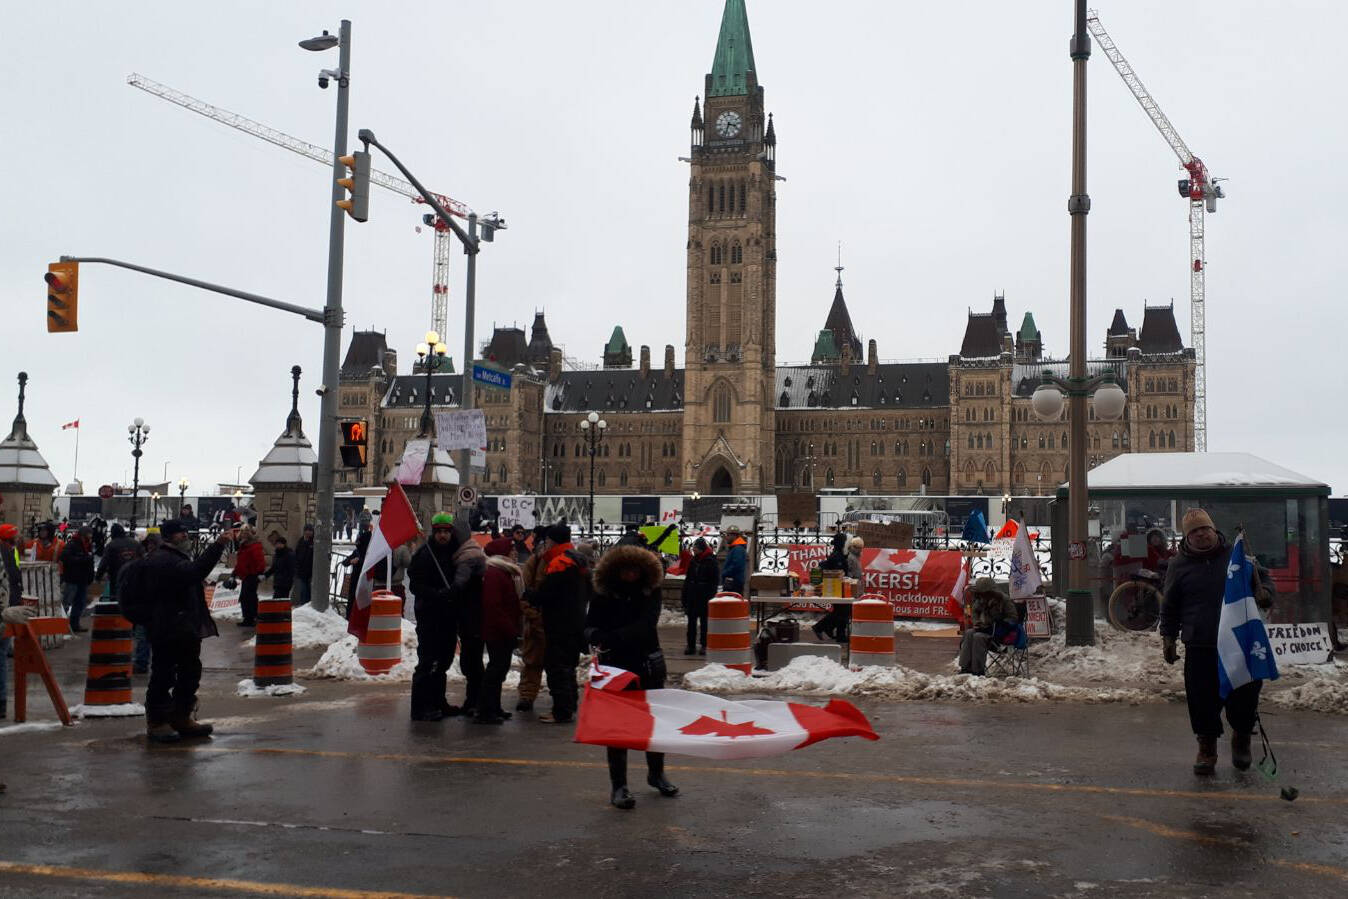 Canadians from all over travelled to Ottawa last week as part of a protest against mandates related to COVID-19. (Photo submitted by Al Fortin)